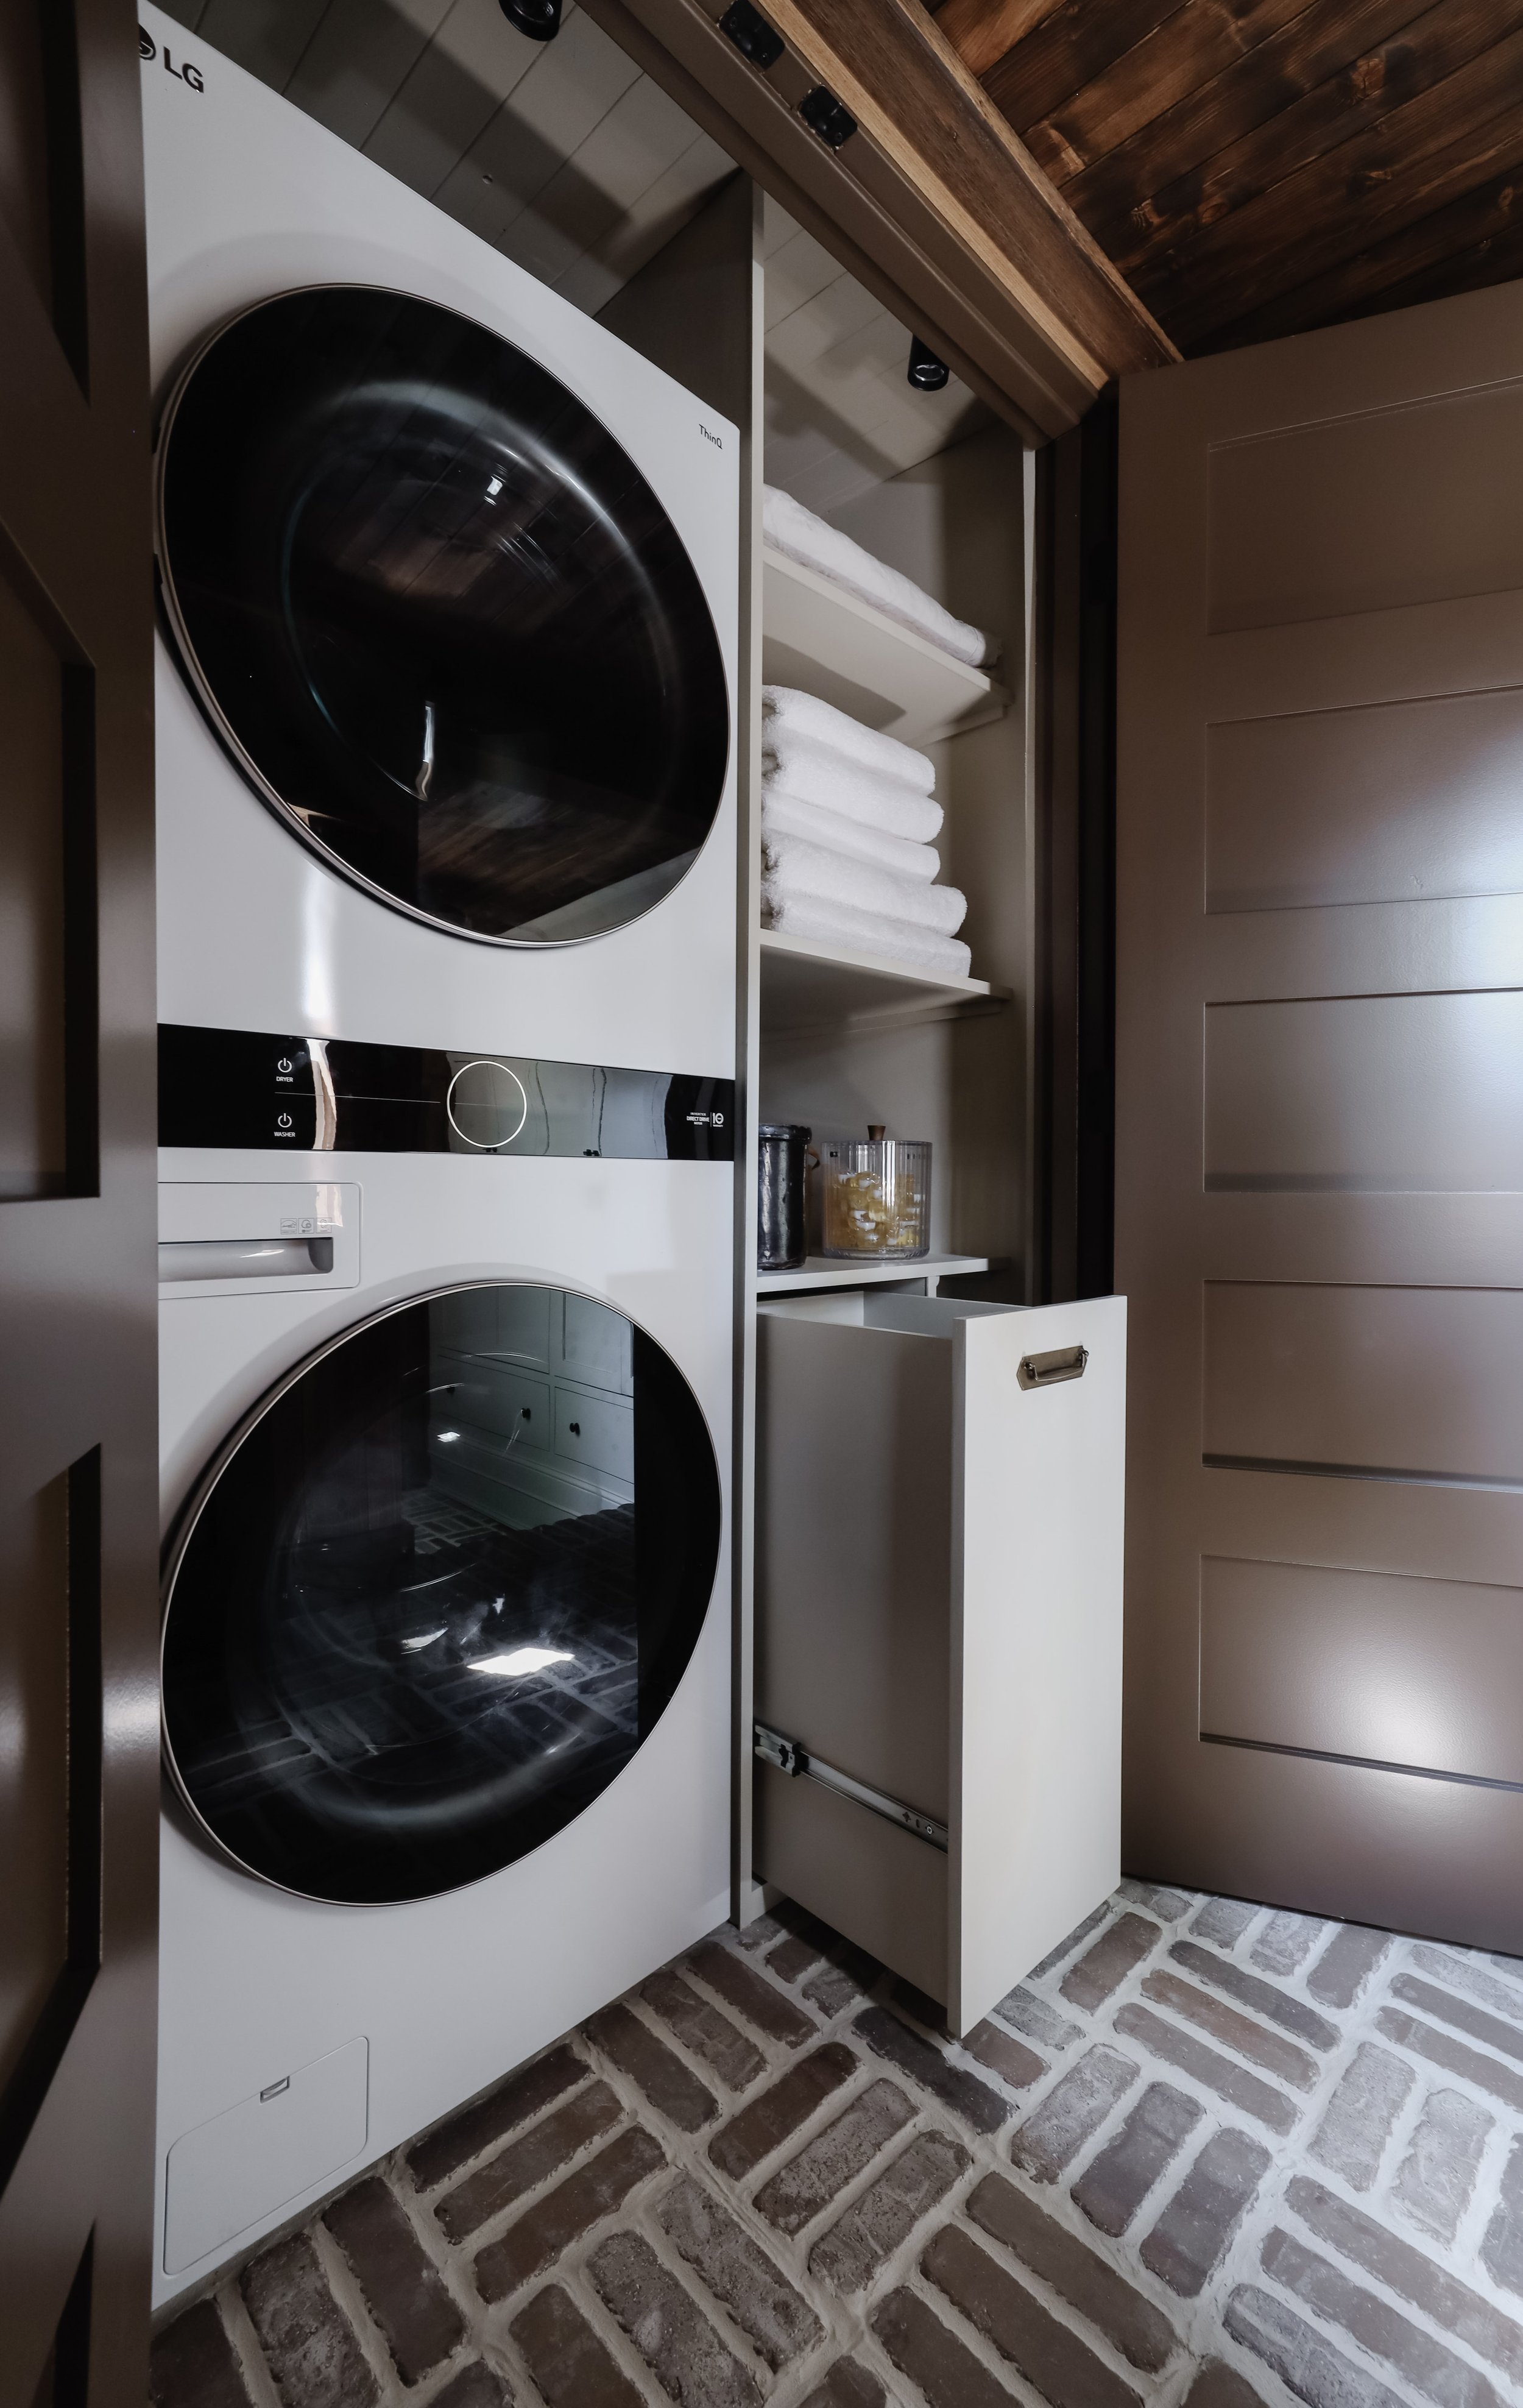 Laundry closet makeover by Nadine Stay | How to maximize storage space in a laundry closet. Stackable washer and dryer I love. Linen closet inspiration. Pull out hamper in closet. Rustic laundry room. Brown doors.